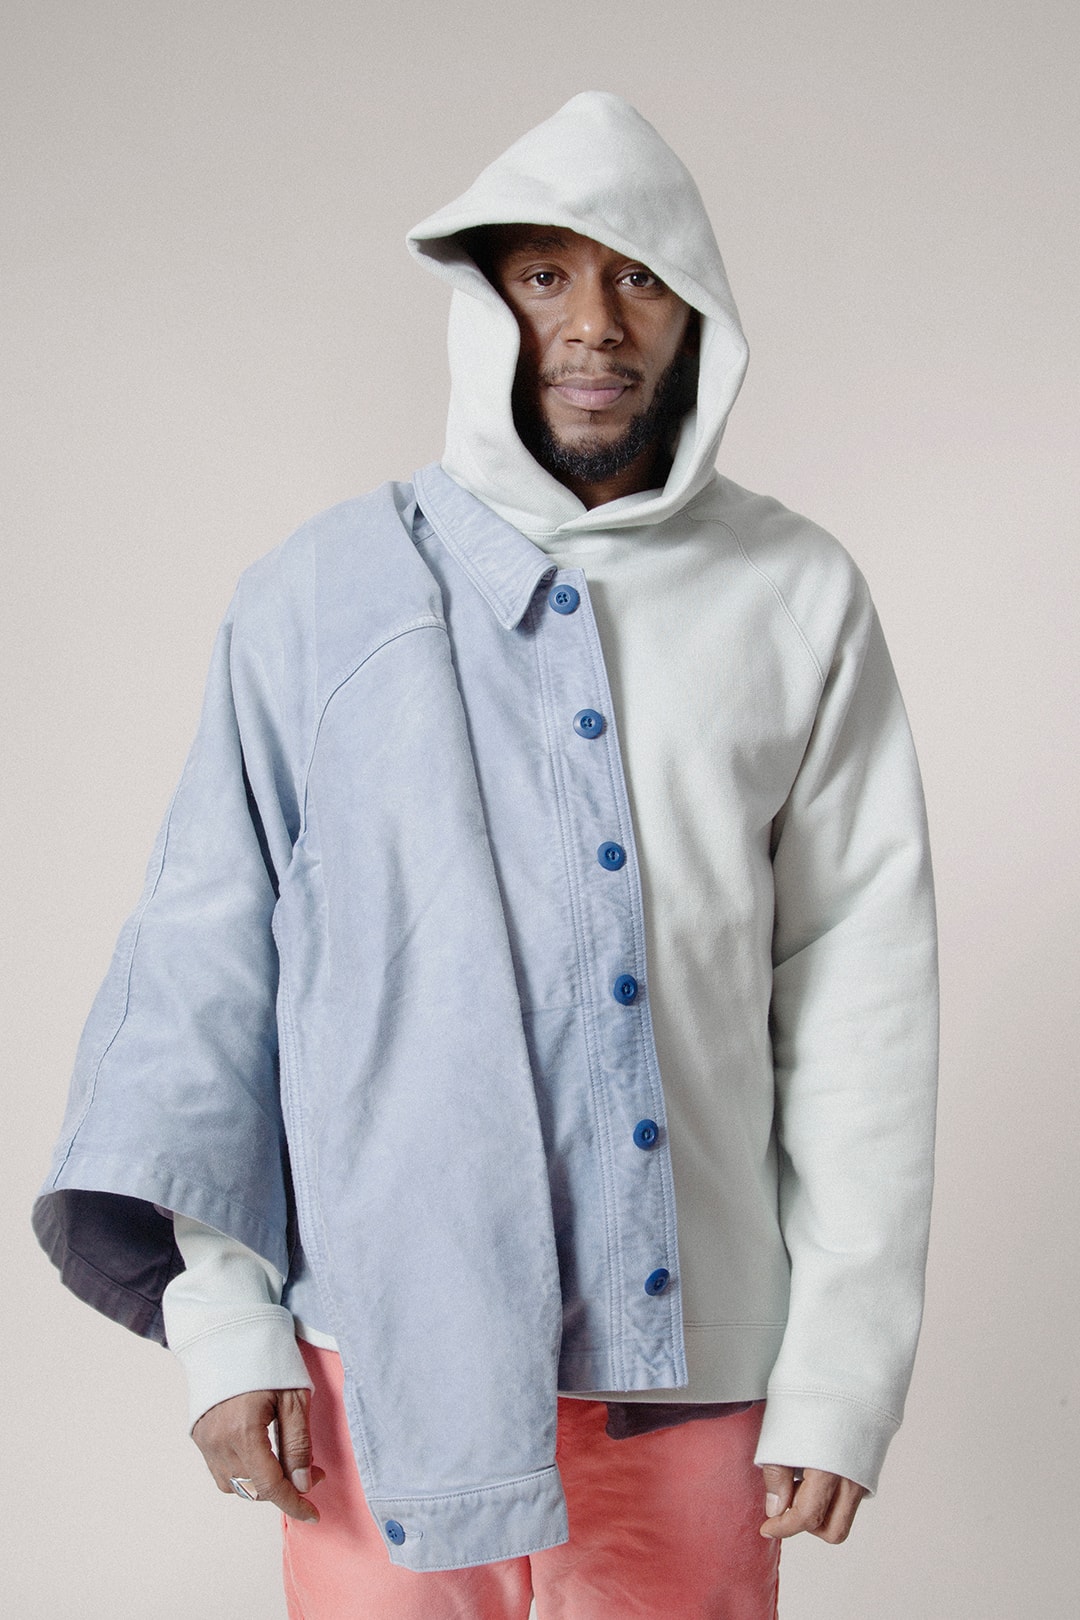 Union Los Angeles Debut Clothing Collection Fall/Winter 2017 Lookbook Yasiin Bey